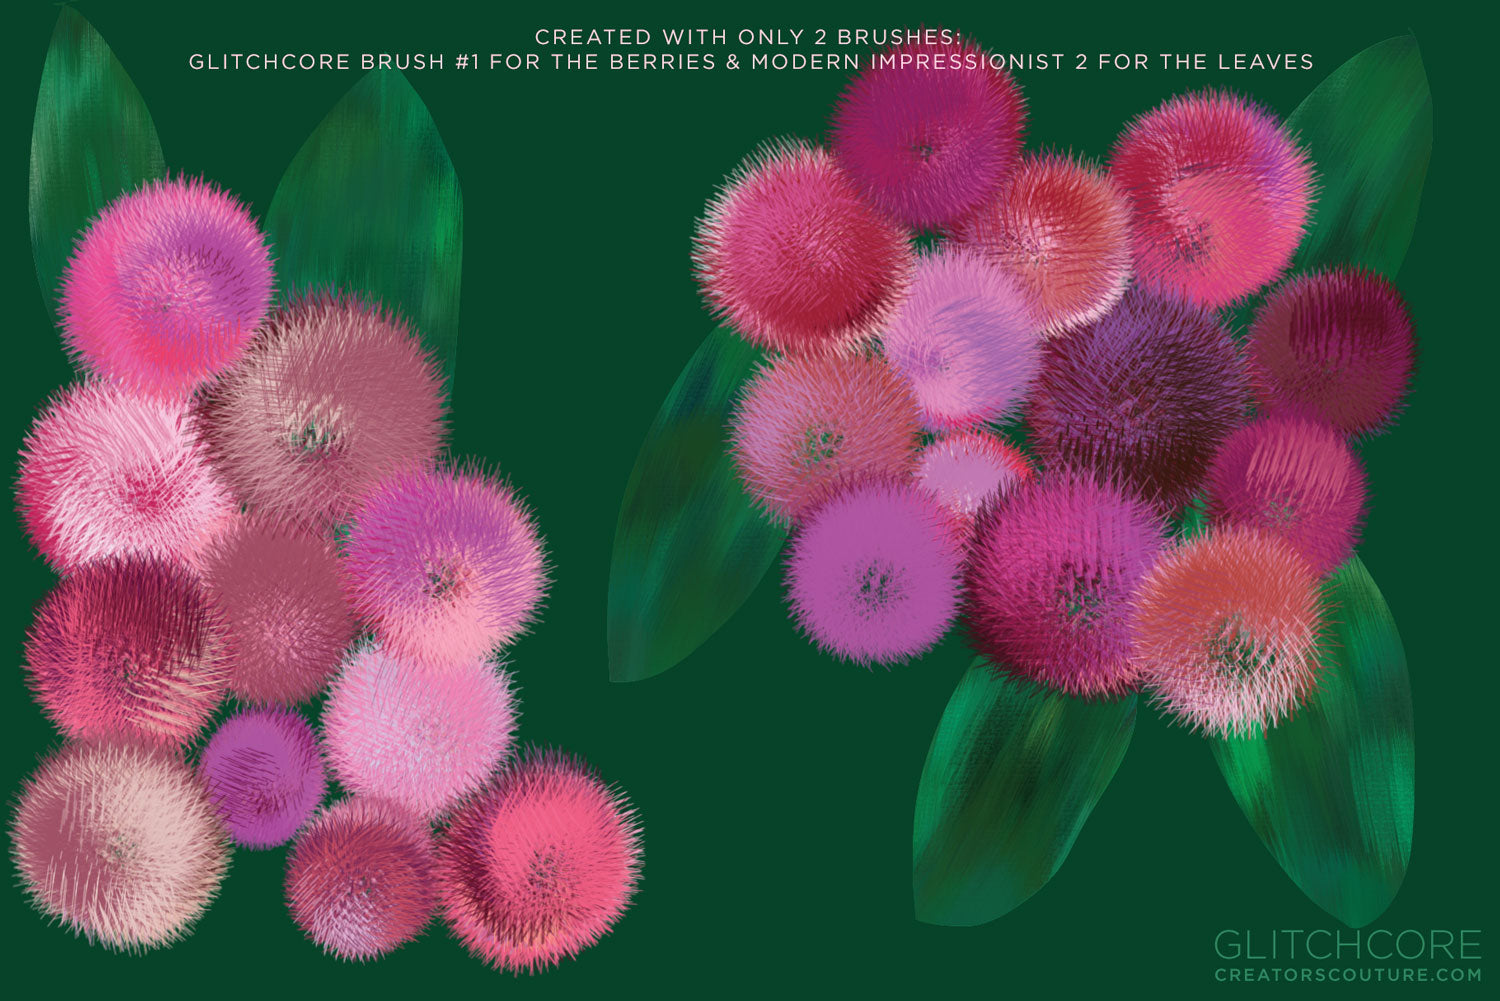 Abstract illustration of berries created with glitch effect, Photoshop brushes, pink, and purple berries on a dark green background. The Photoshop brushstroke creates a furry effect on the berries